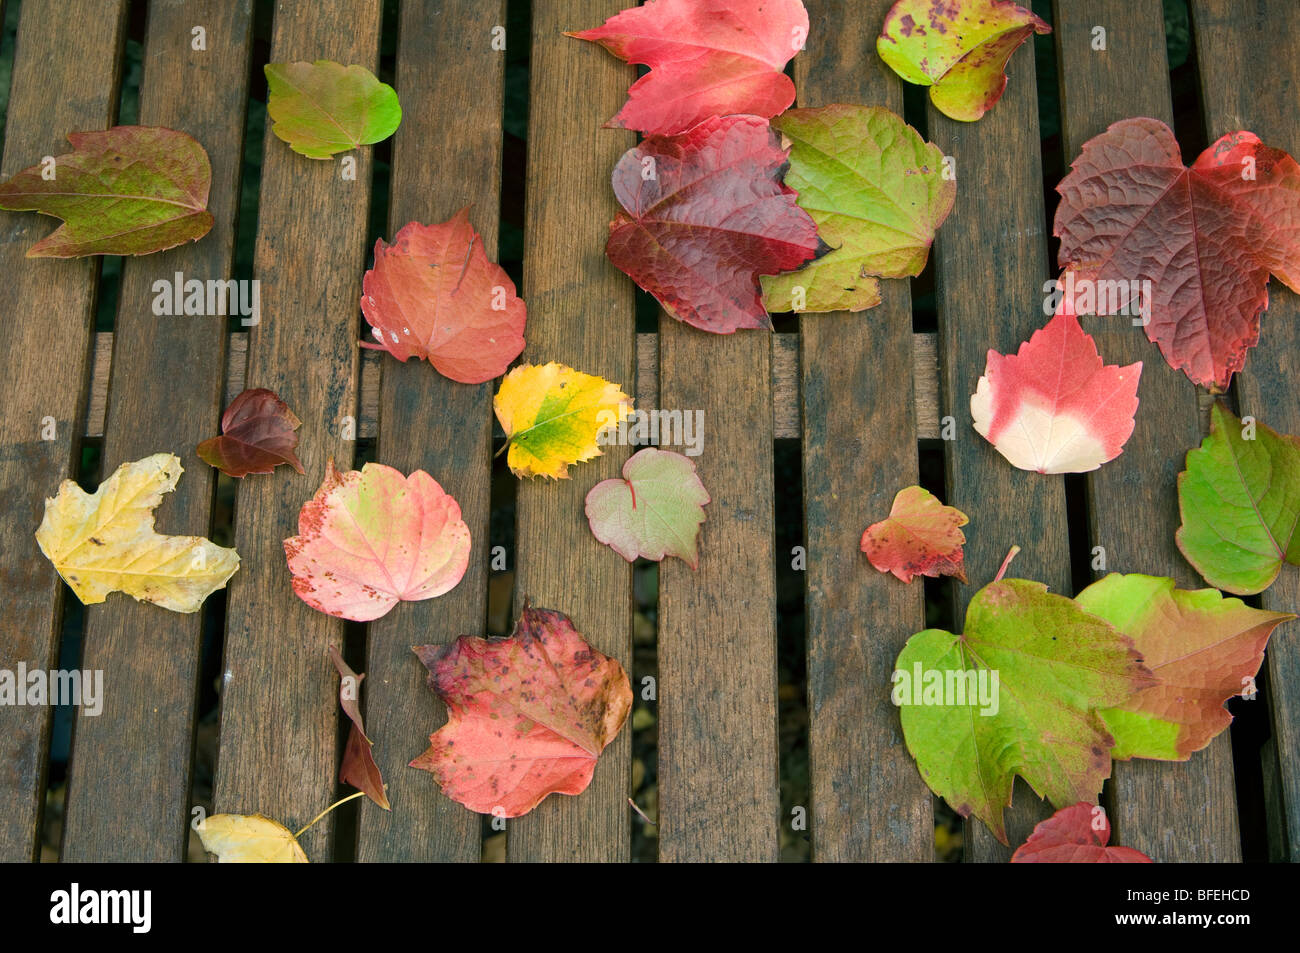 Autumn leaves mostly Virginia creeper on a garden table Stock Photo